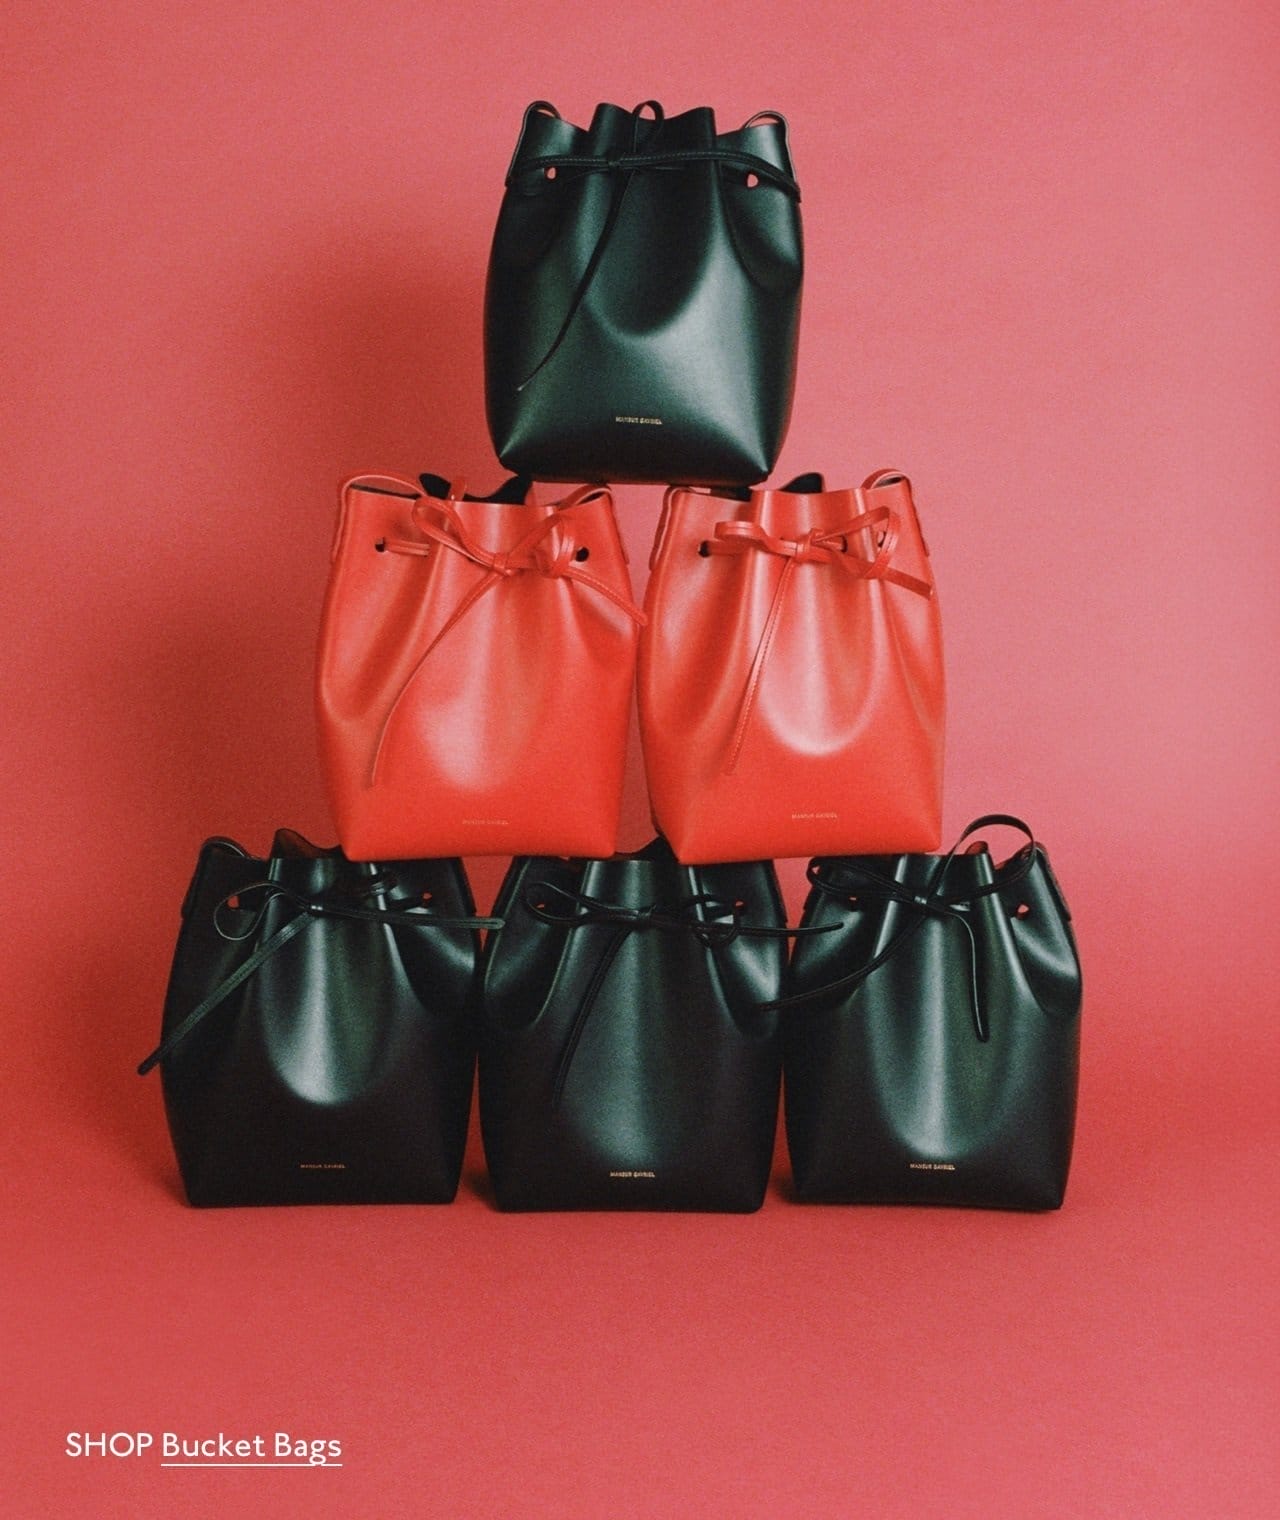 Shop iconic buckets. Pictured: the Mini Bucket Bag in Black/Flamma and Poppy.